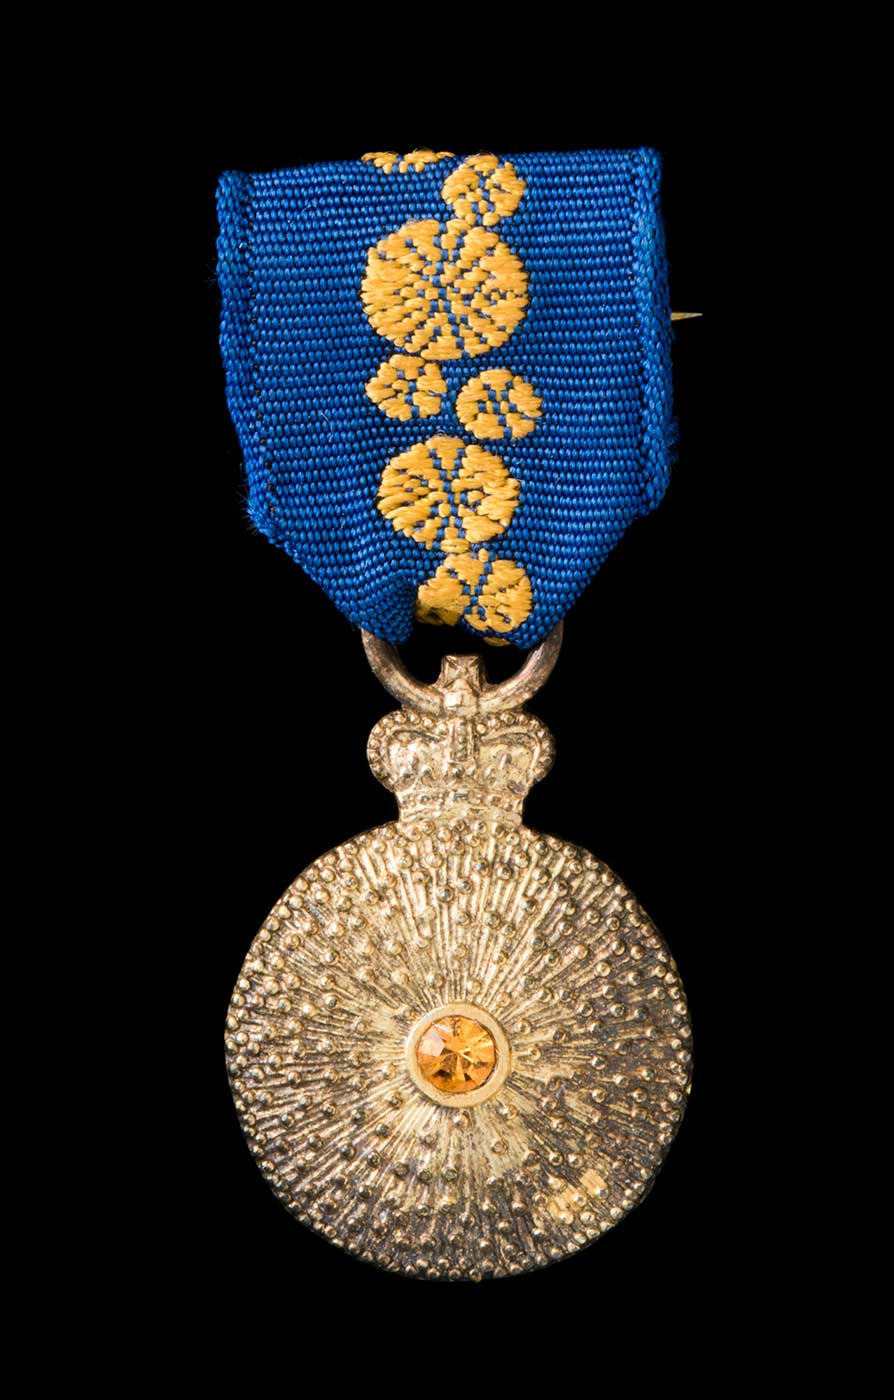 A miniature Order of Australia medal with ribbon. The circular medal has a crown at the top, and is gold in colour with a central amber coloured inset and a raised radiating surface pattern. The medal is hung from a royal blue ribbon with a central band of stylised wattle blossoms, which is attached to a bar clasp pin which is gold in colour. - click to view larger image